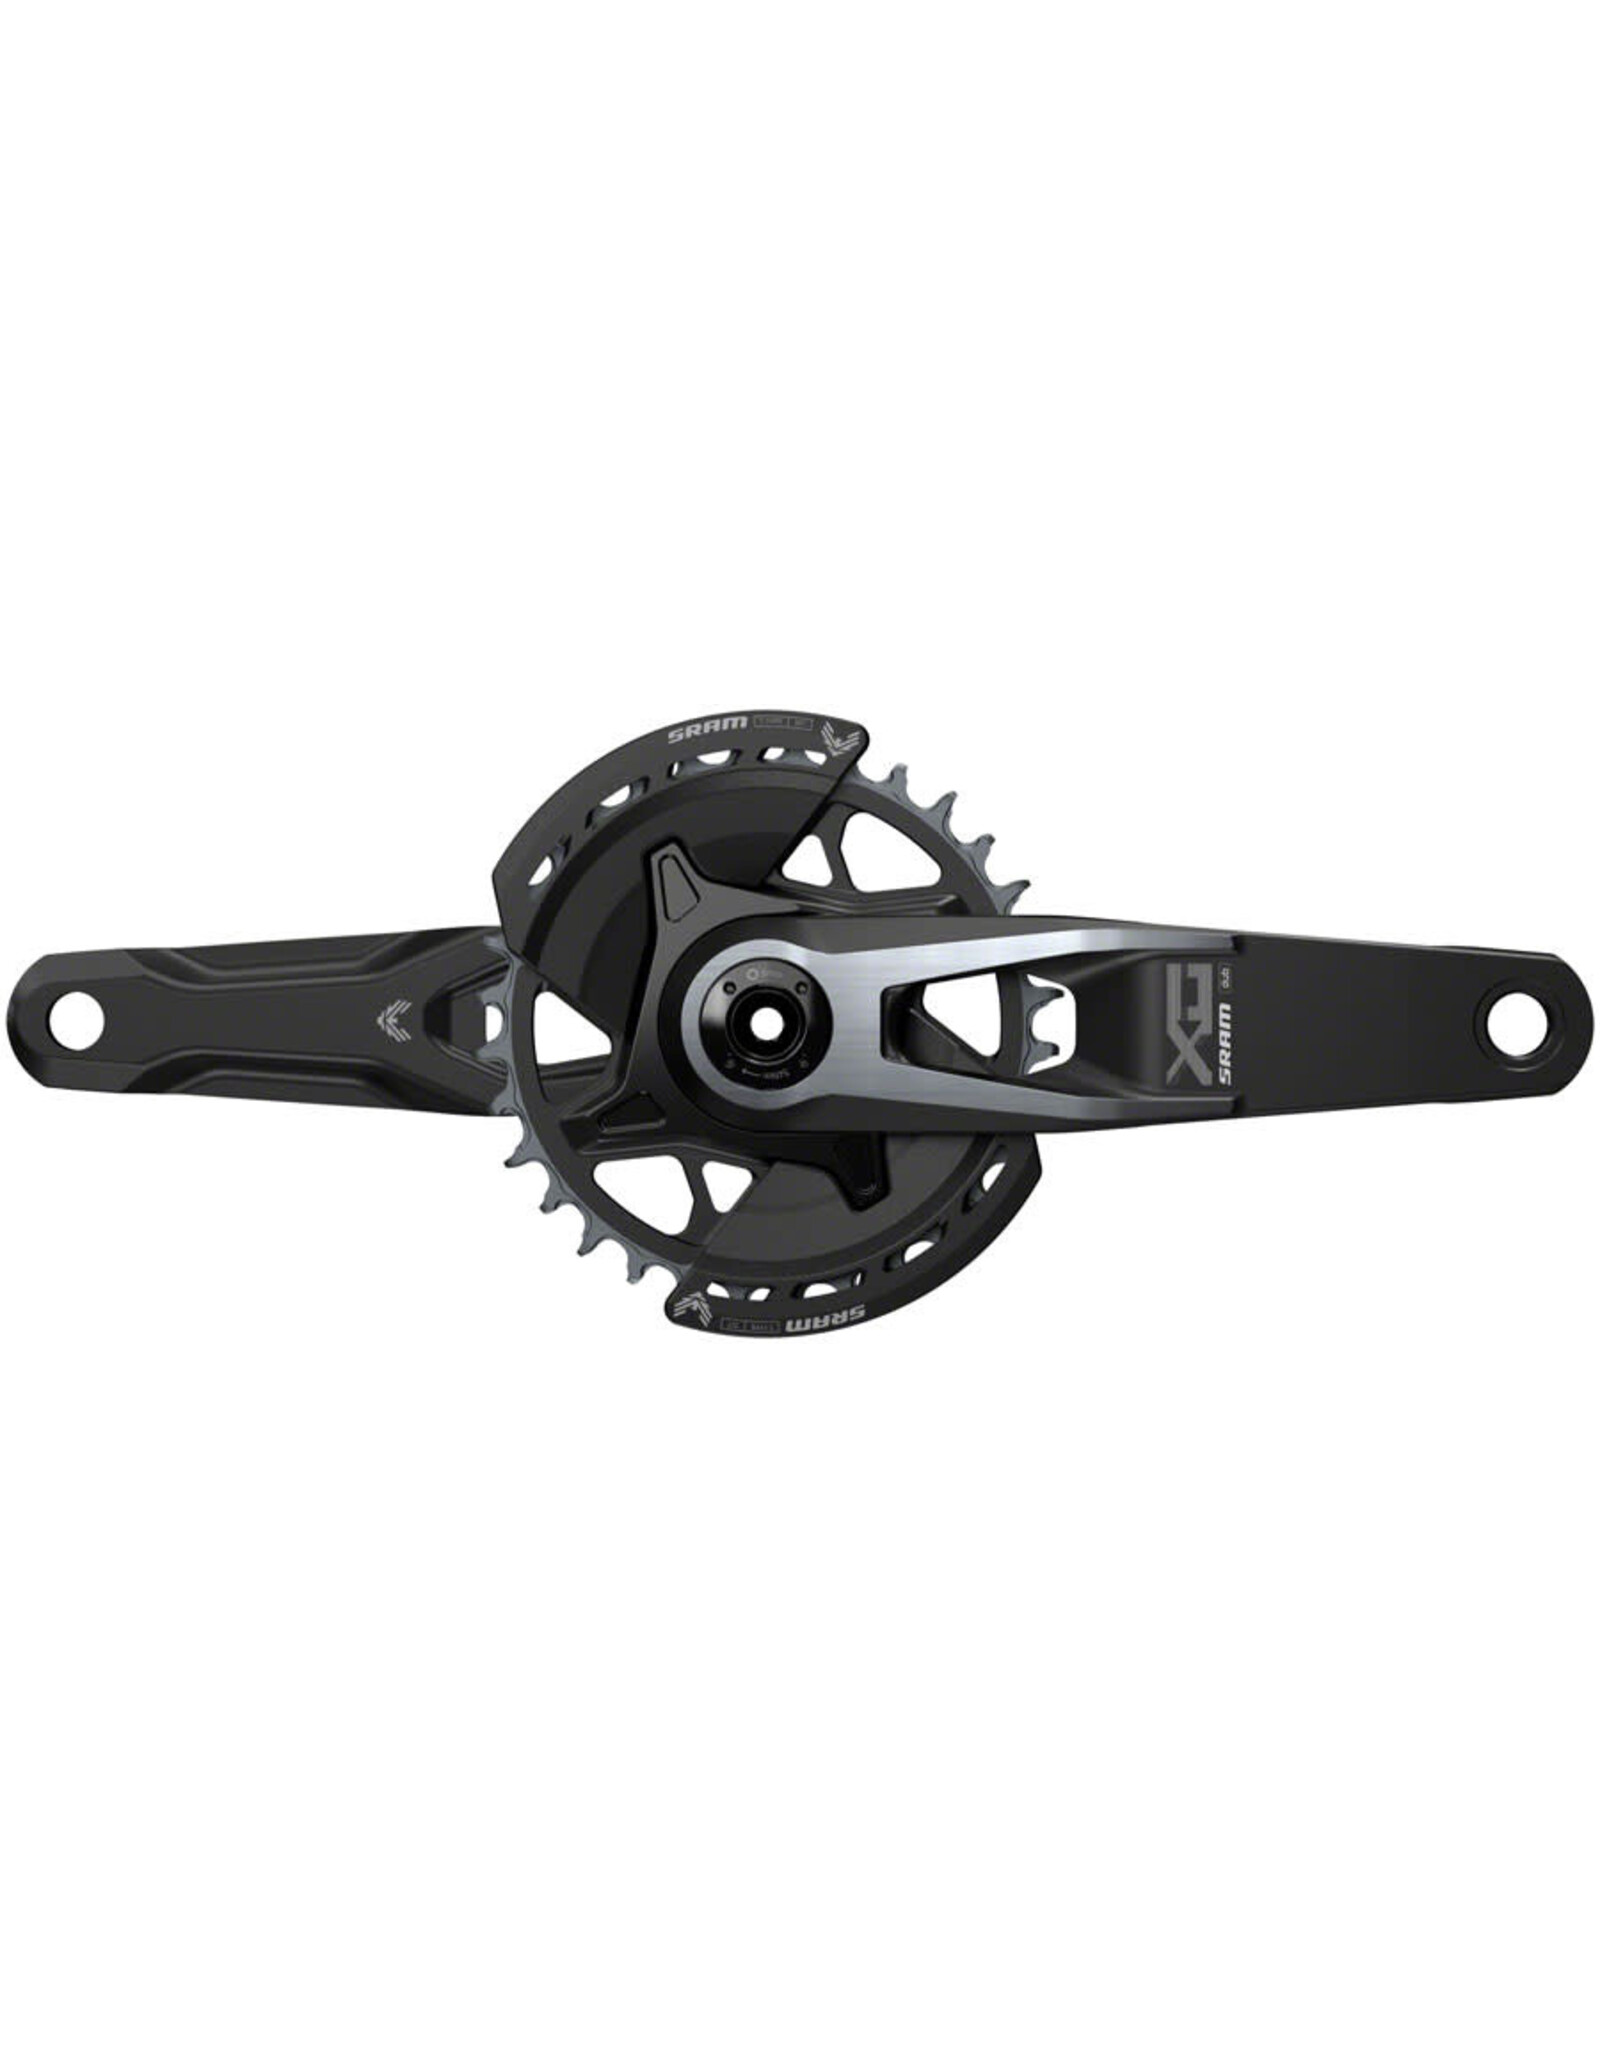 SRAM SRAM X0 Eagle T-Type Wide Crankset - 170mm, 12-Speed, 32t Chainring,  Direct Mount, 2-Guards, DUB Spindle Interface, Black